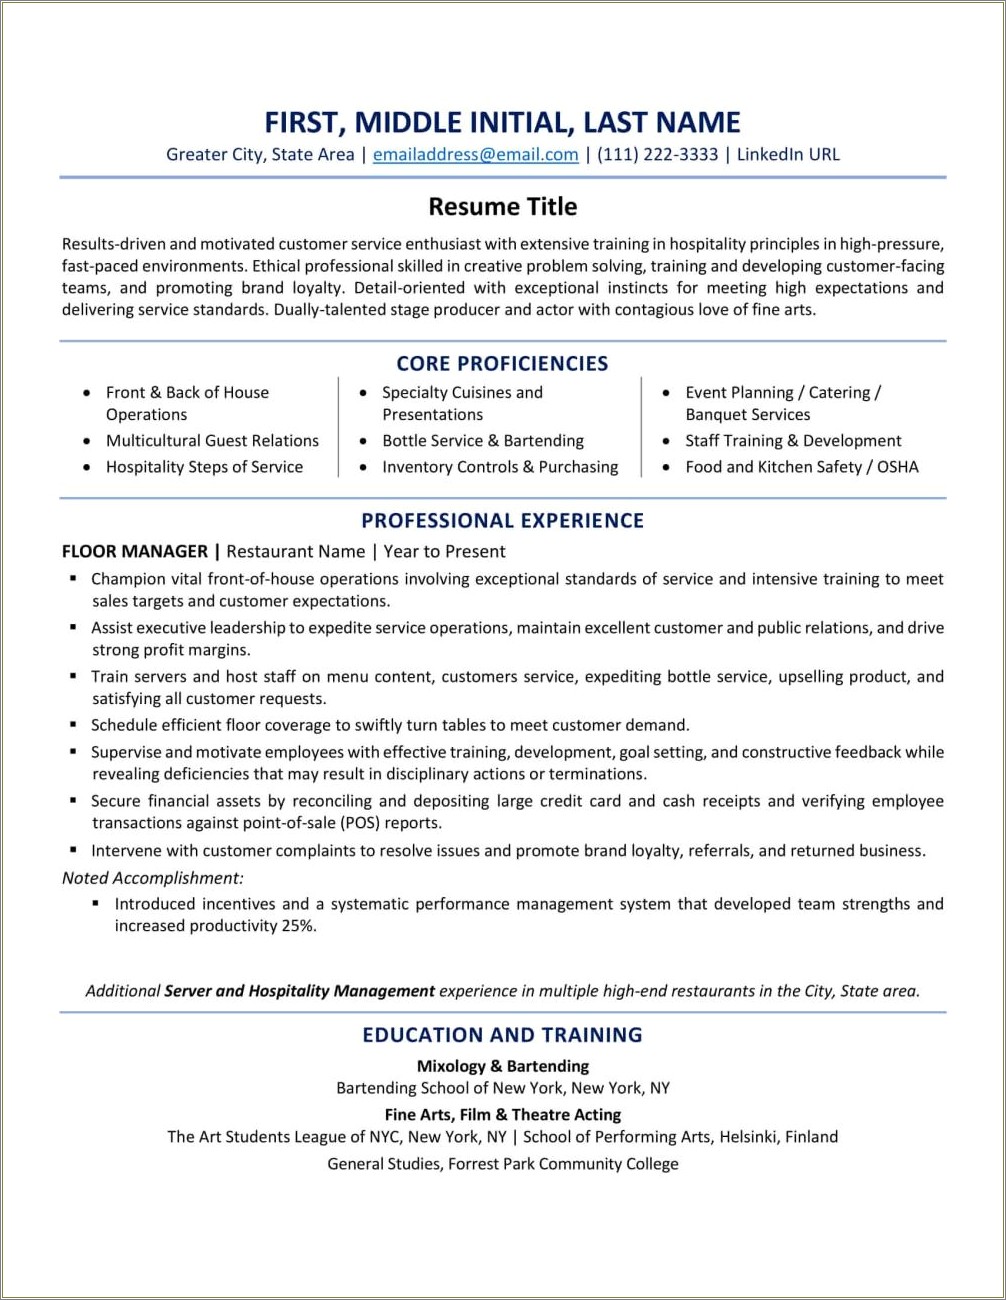 Career Summary For Resume No Work Experience